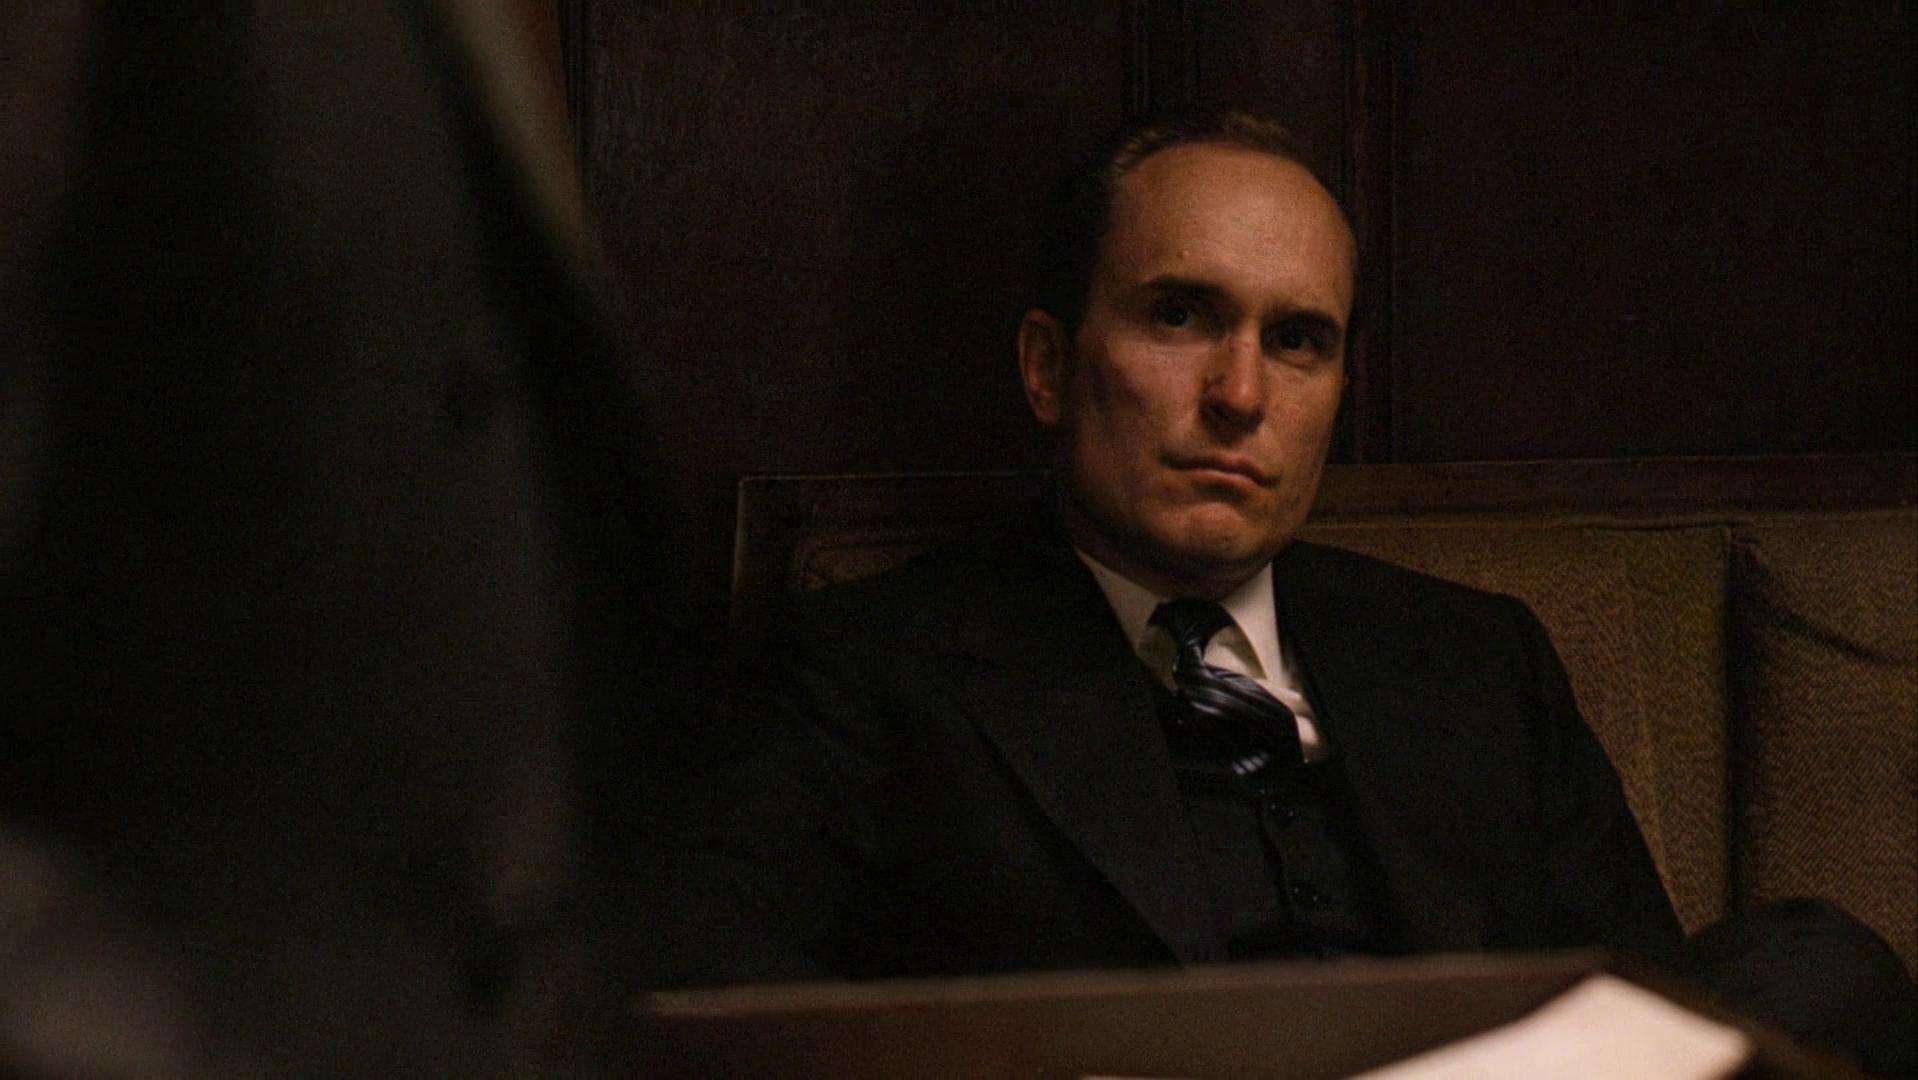 Robert Duvall in The Godfather (1972)